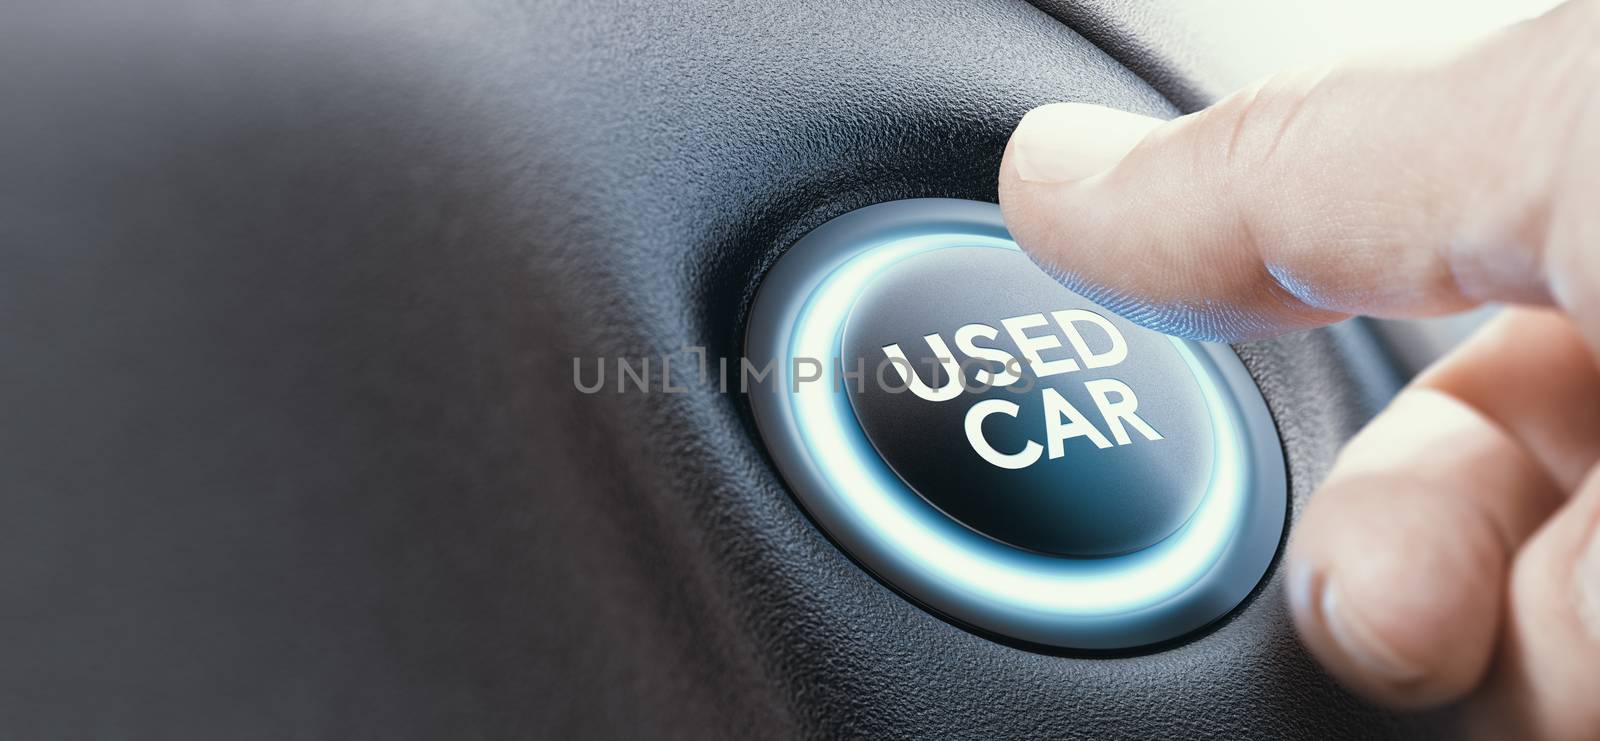 Finger pressing the start button of an used car. Composite image between a hand photography and a 3D background.